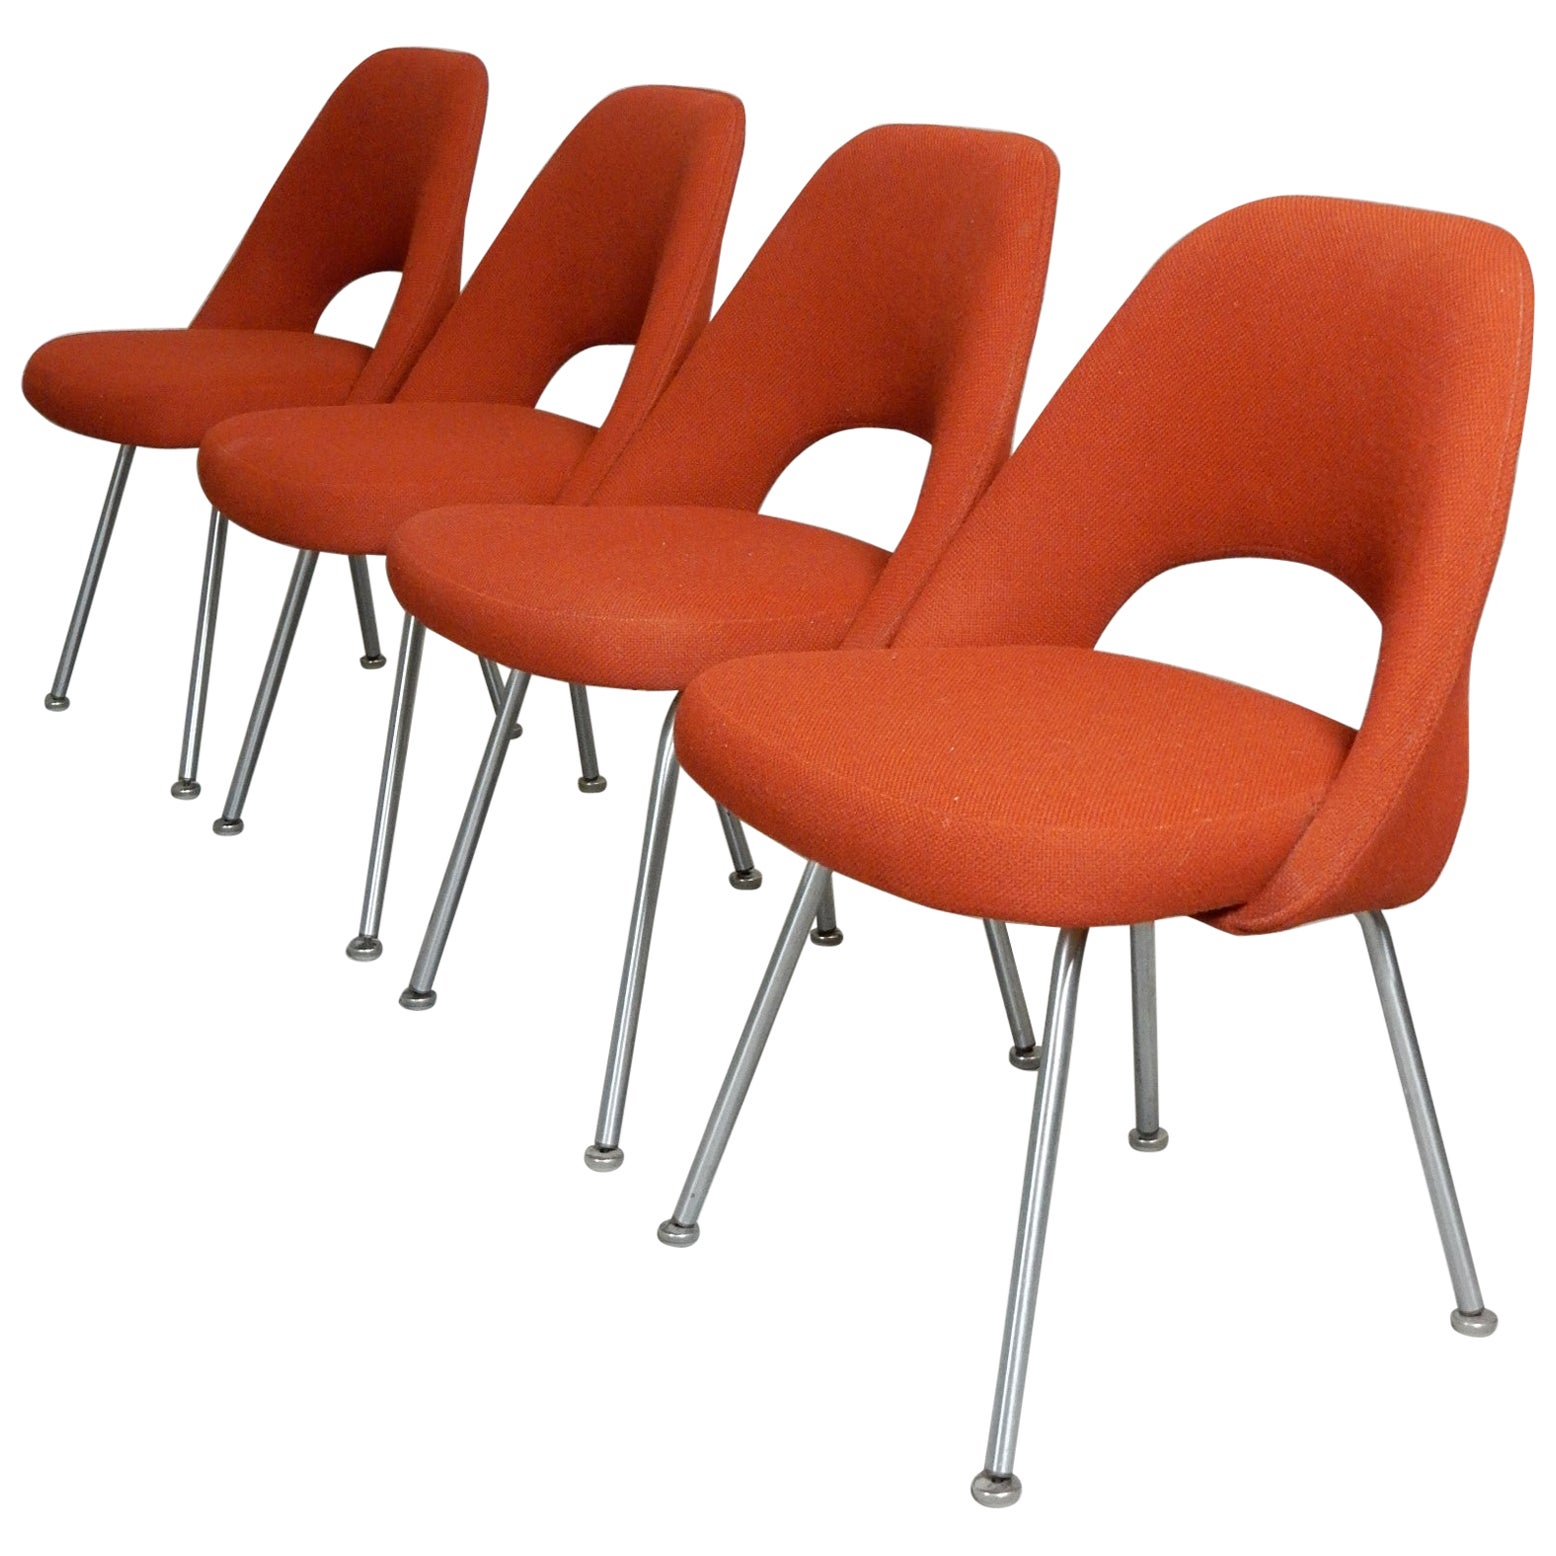 Mid-Century Saarinen for Knoll Executive Armless Chairs. set of 4, dated 1963 For Sale